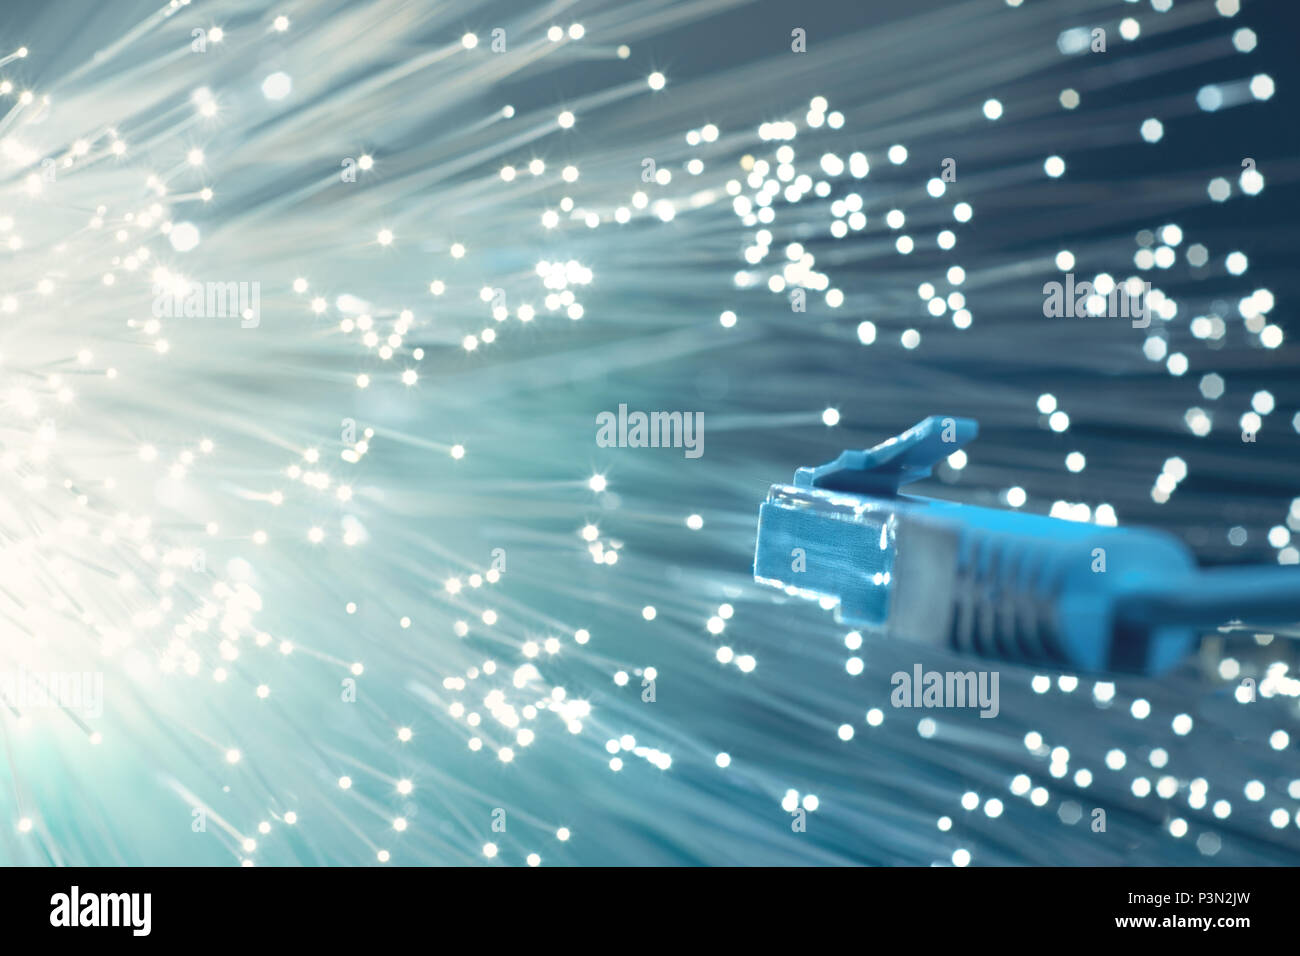 Futuristic technological background, closeup on the end of optical fiber network cable on turquoise background. Shallow DOF, partial focus on the plug Stock Photo